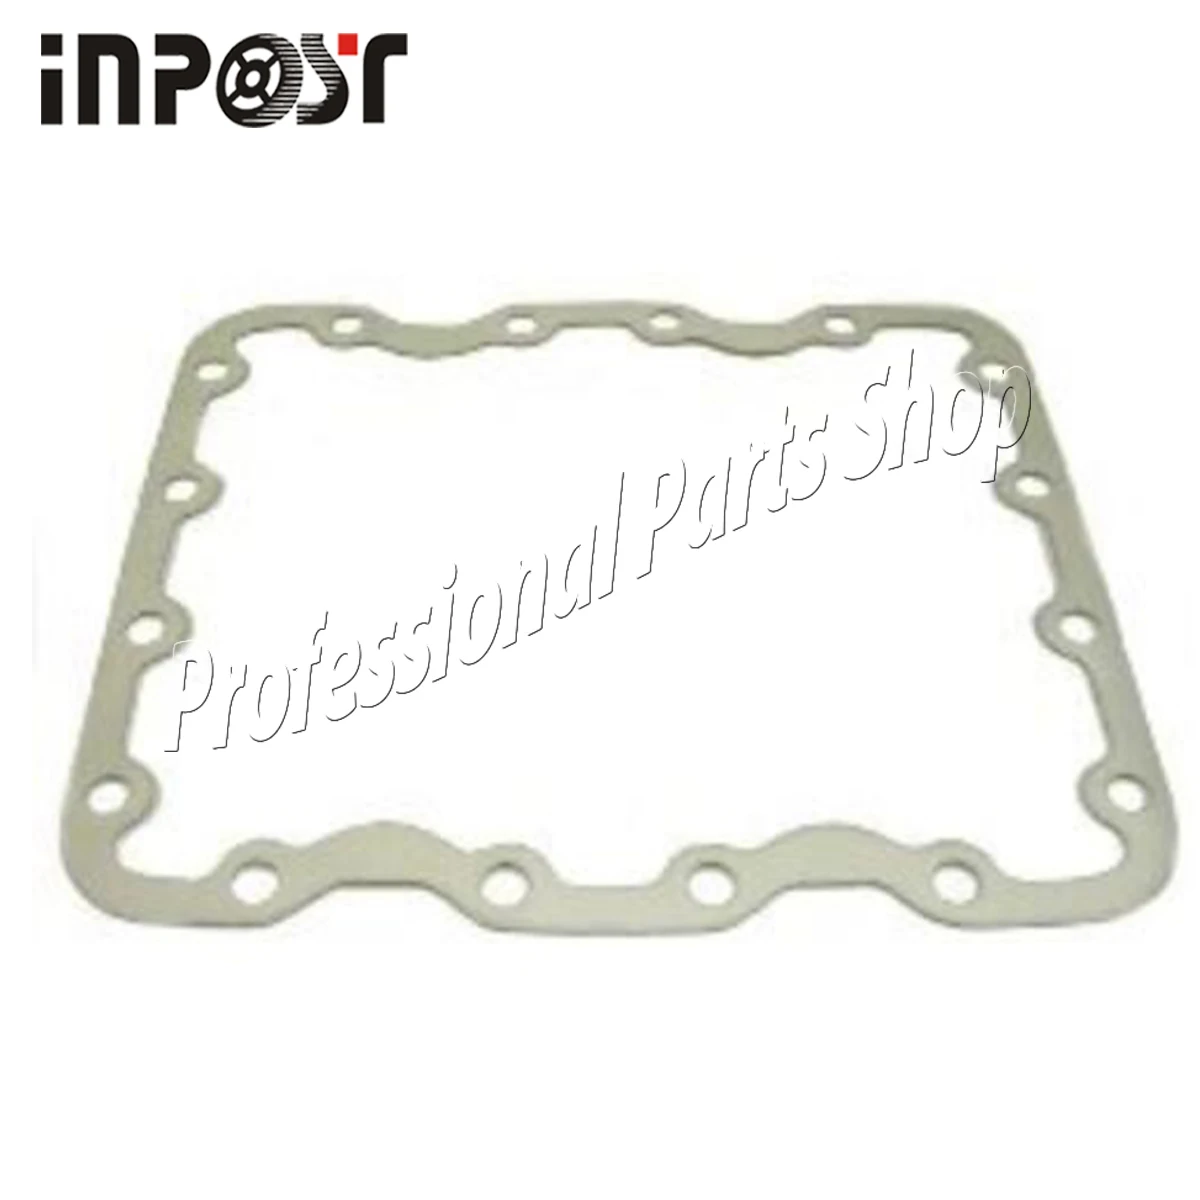 

33-2515 Oil Sump Gasket for Thermo King Compressor X426 X430 X426LS X430LS